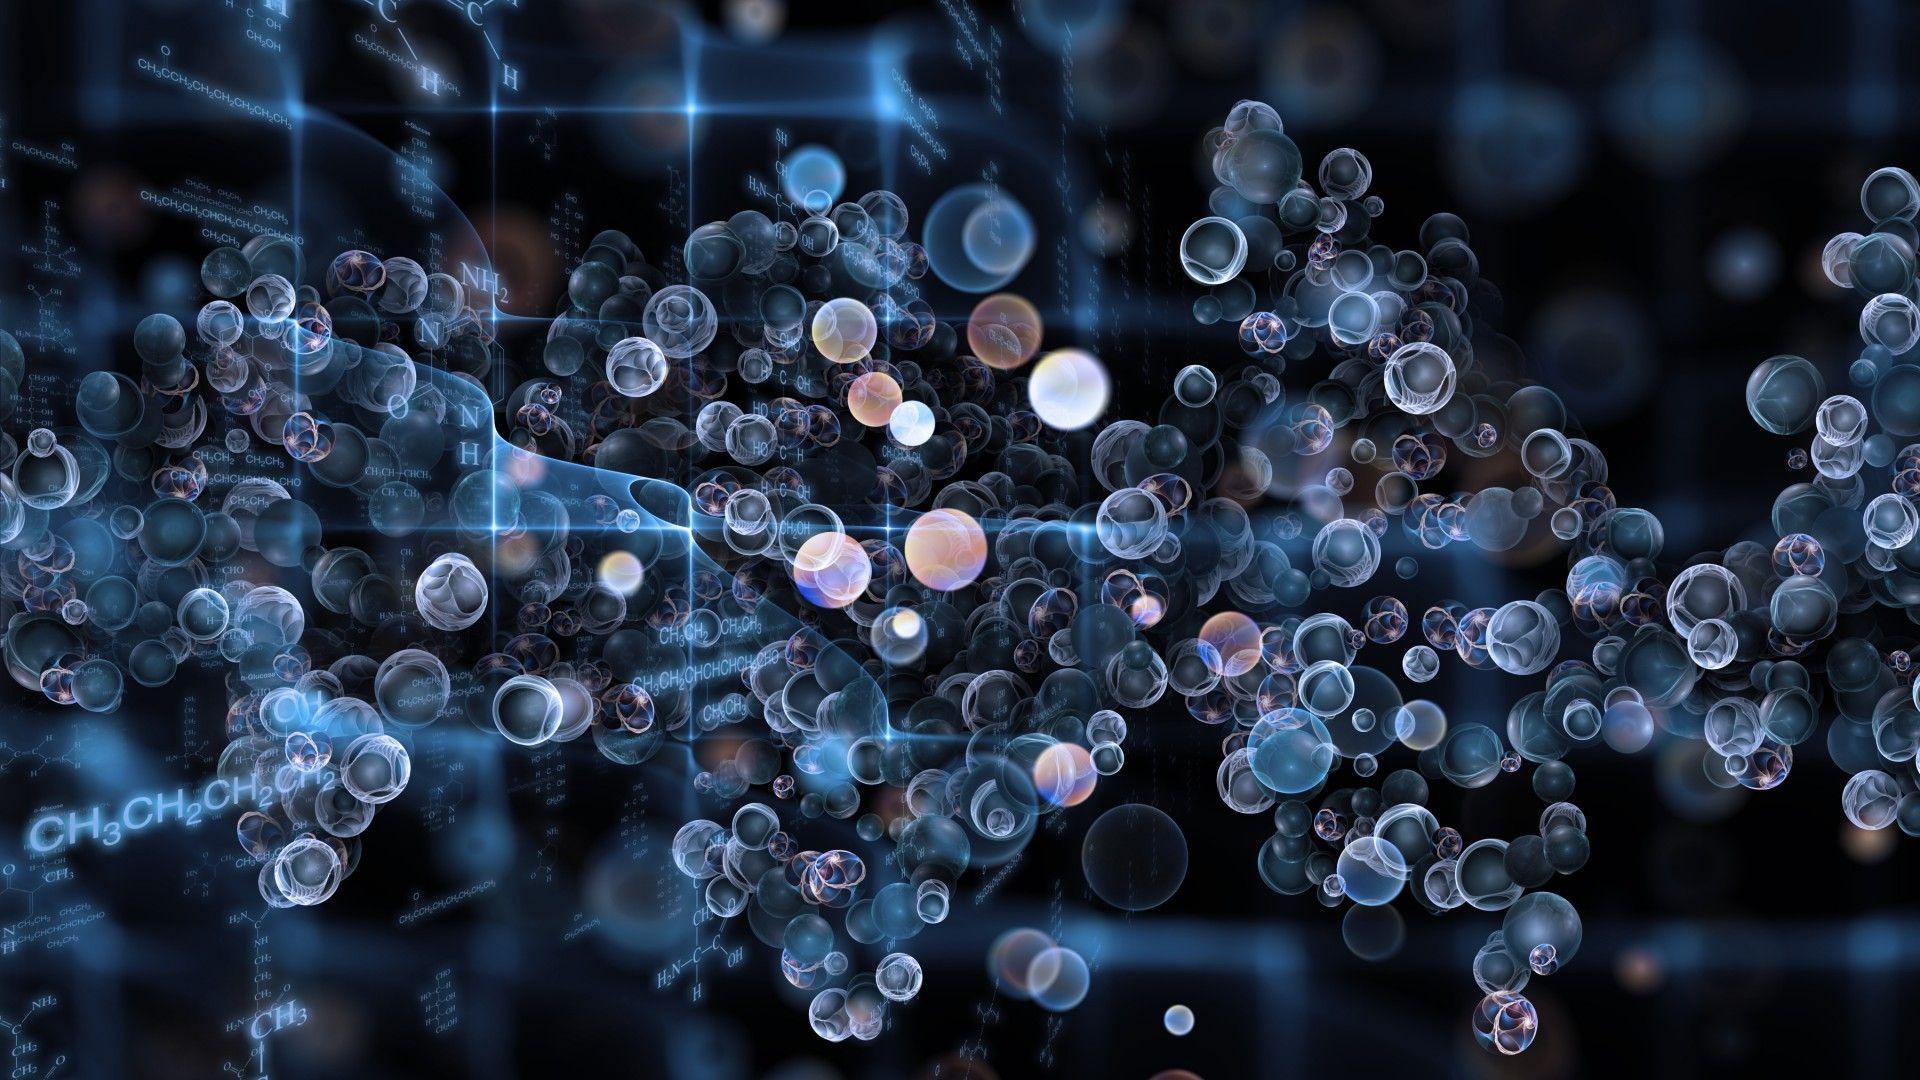 image Of HD Wallpaper Based On Chemistry Desktop Abstract Bubbles